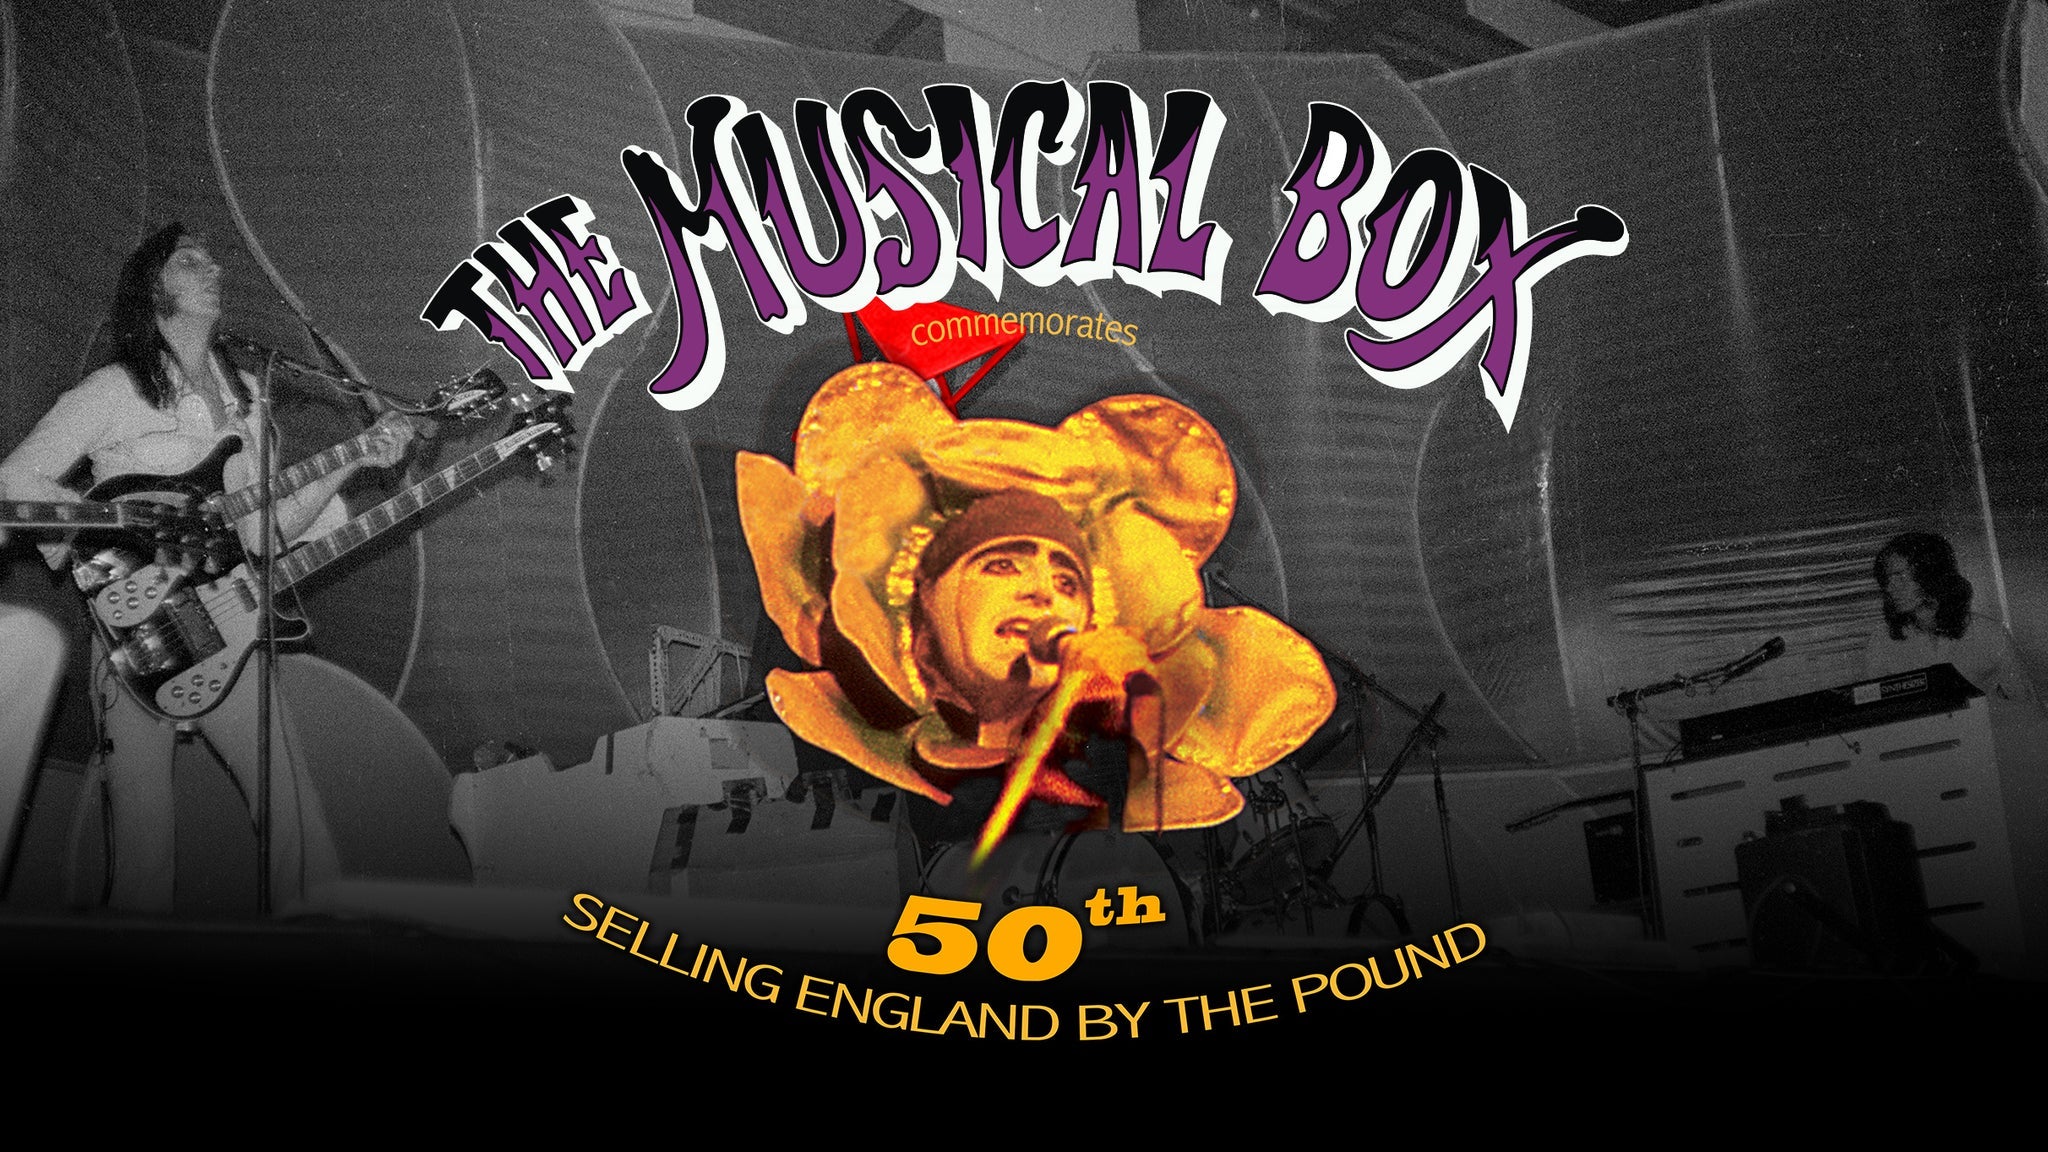 THE MUSICAL BOX SELLING ENGLAND BY THE POUND